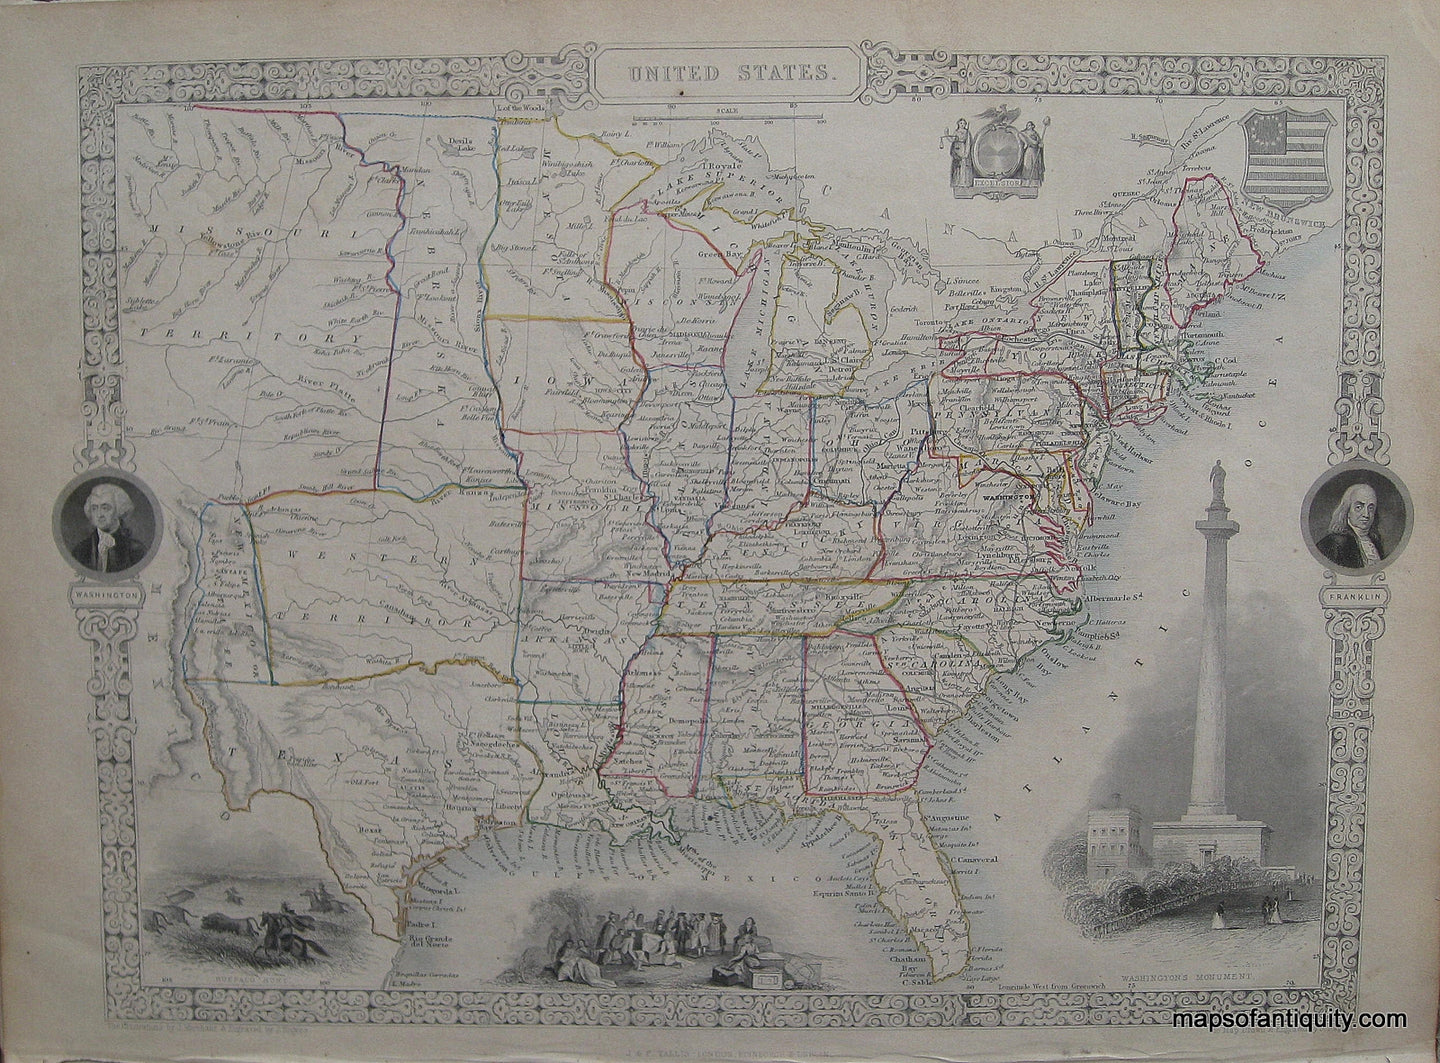 Antique-Hand-Colored-Map-United-States.**********--United-States--1848-Tallis-Maps-Of-Antiquity